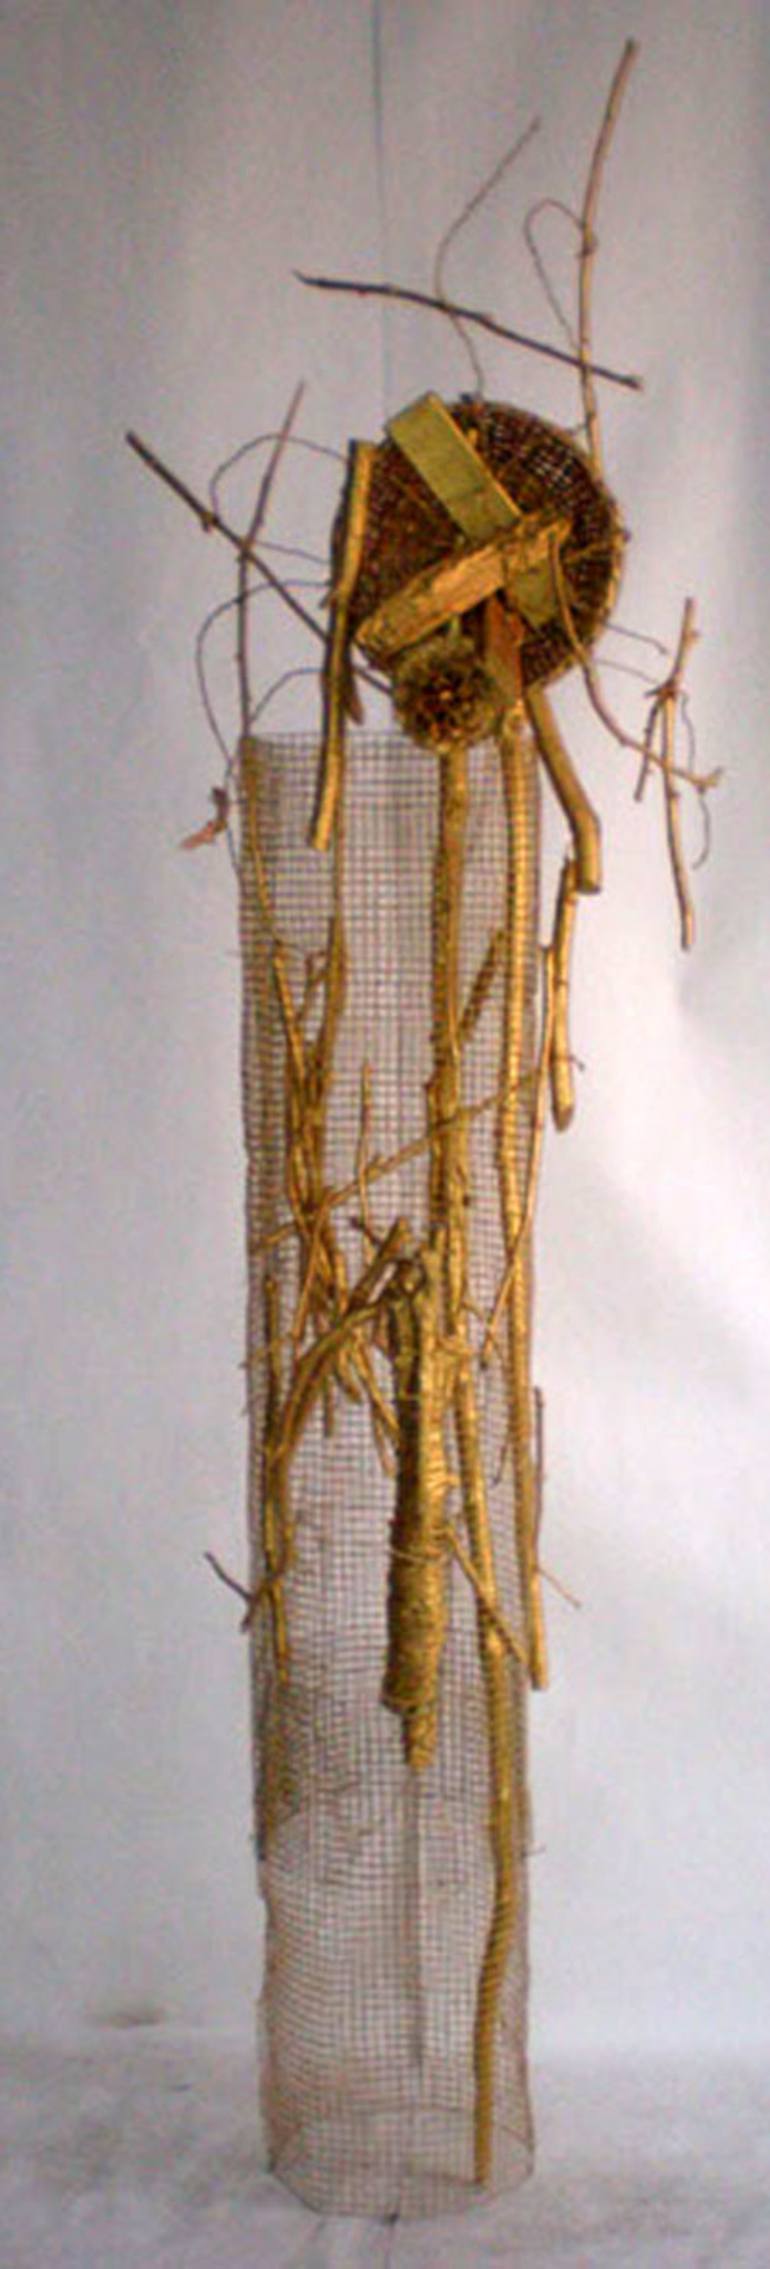 Original Nature Sculpture by Mary Hrbacek